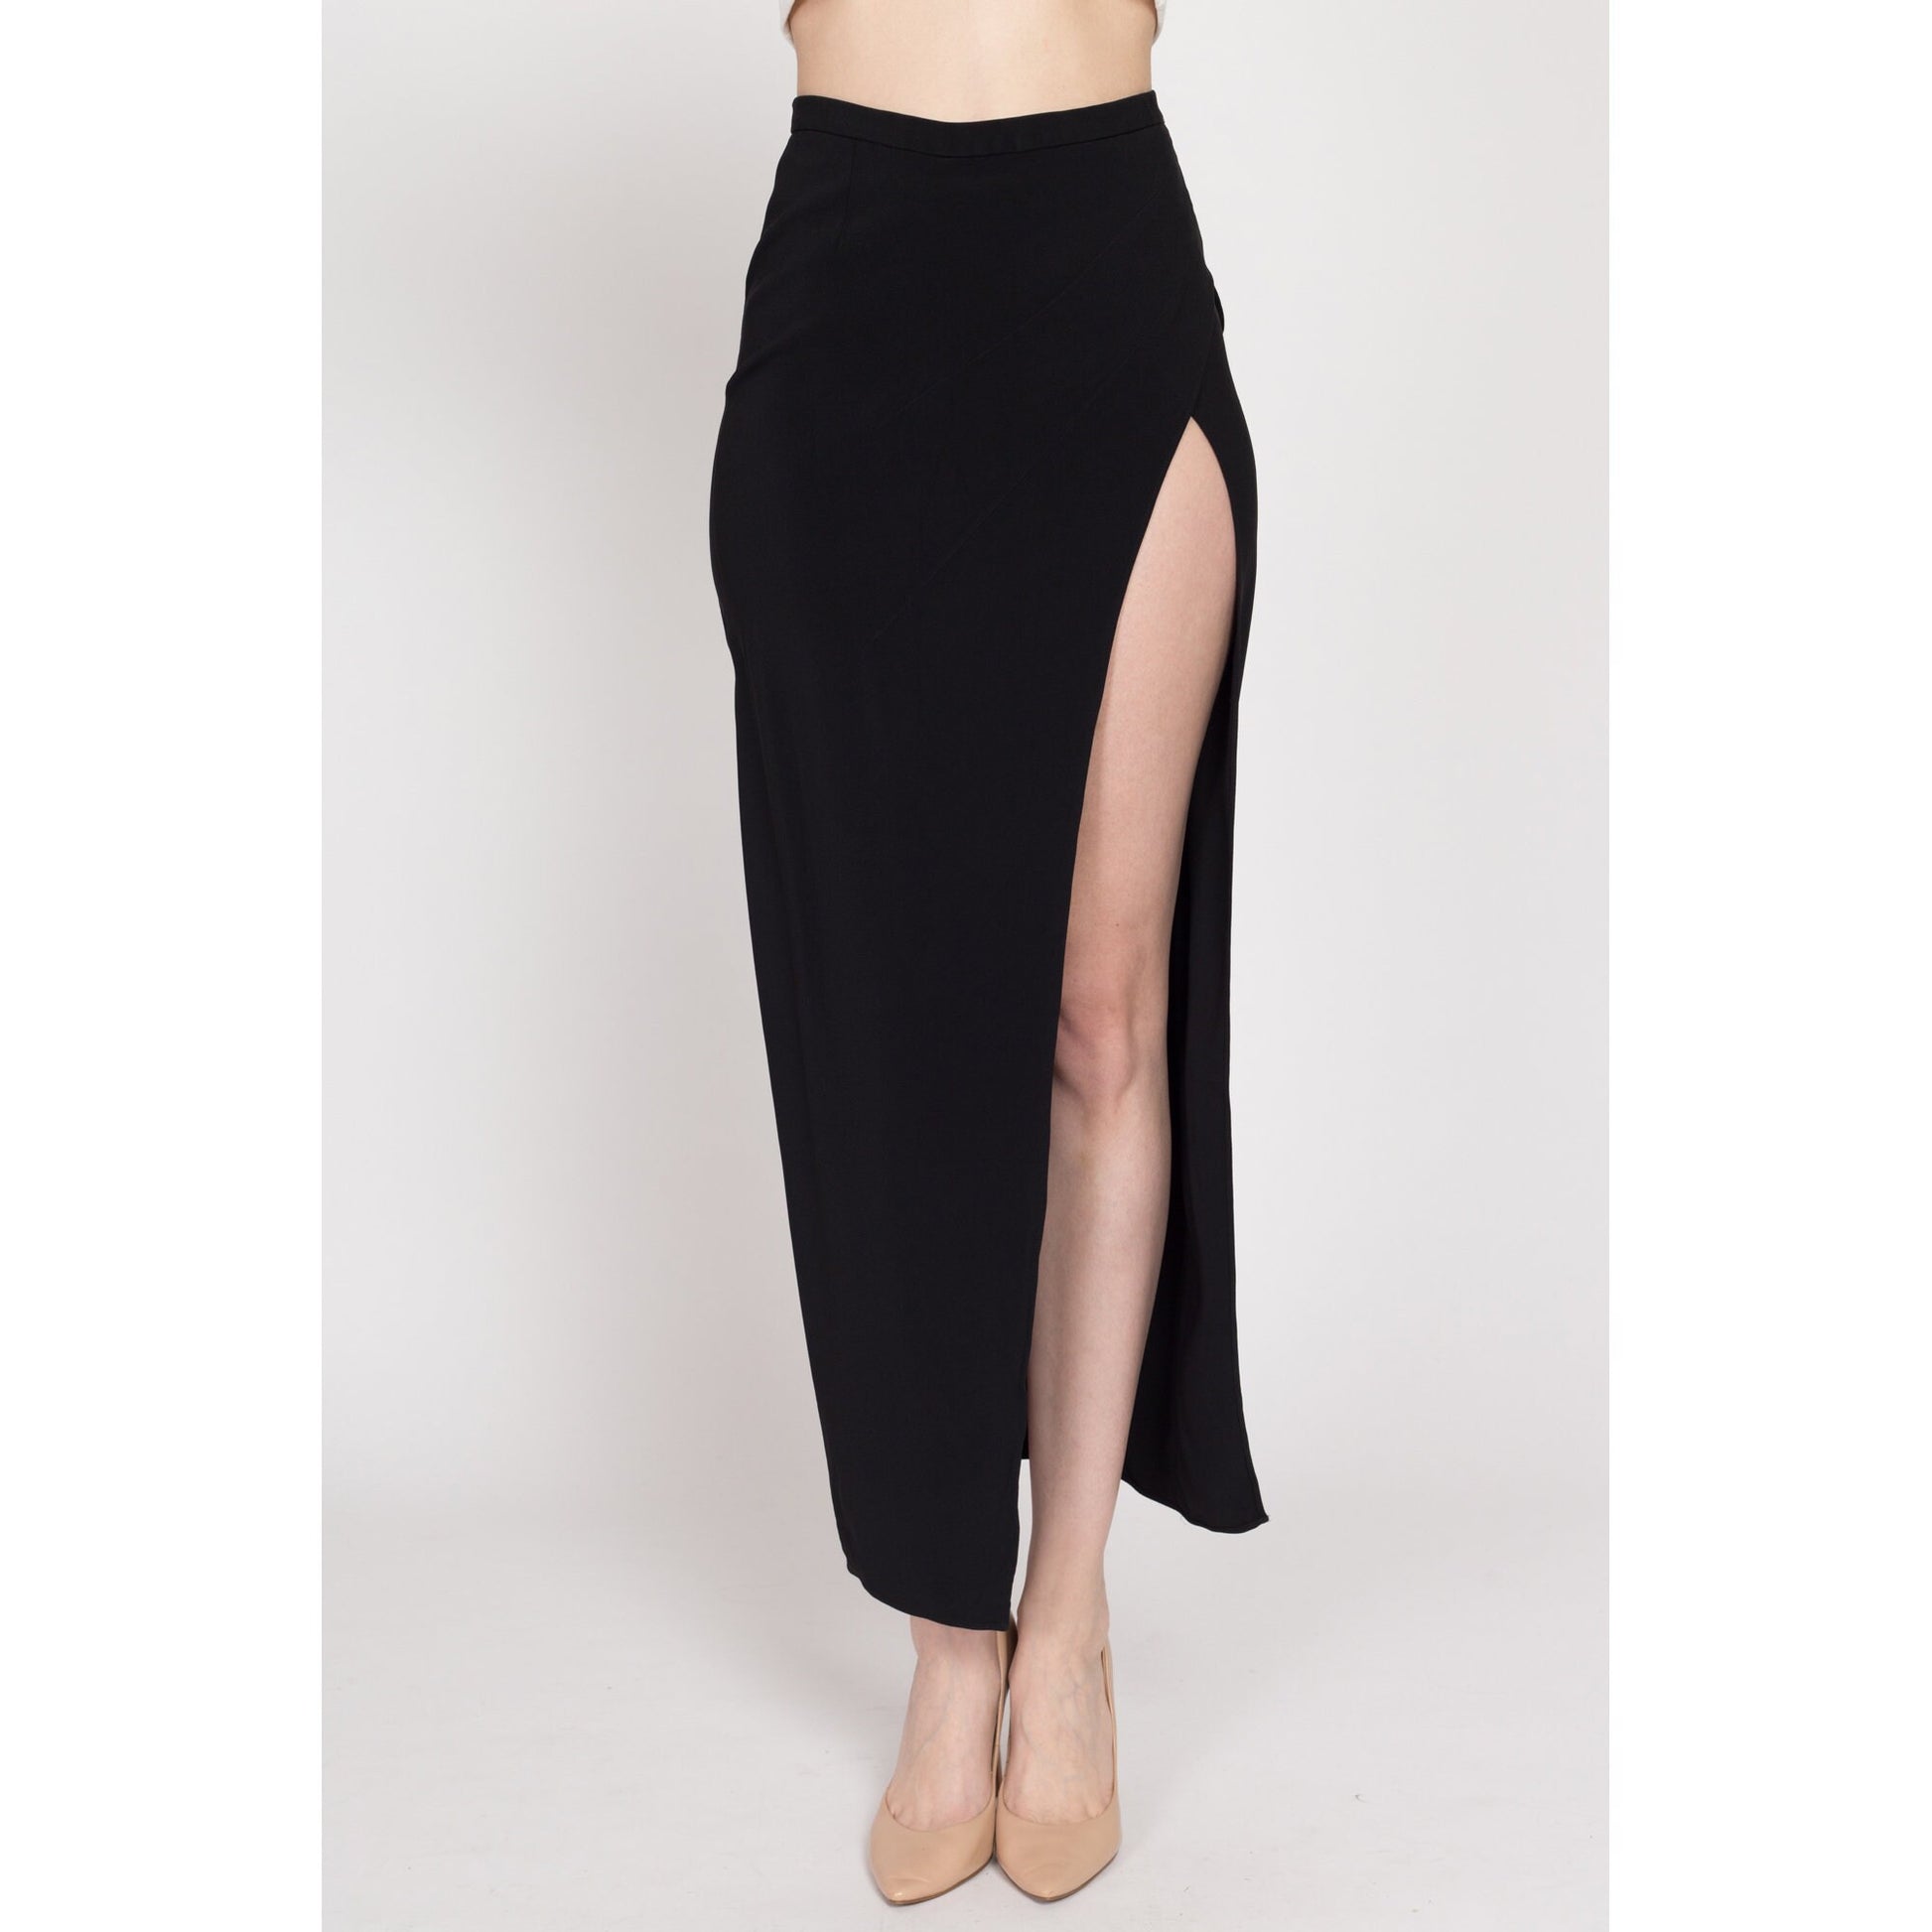 XS 90s Moschino Couture Black High Thigh Slit Maxi Skirt 25.5" | Vintage Designer High Waisted Sexy Fitted Pencil Skirt